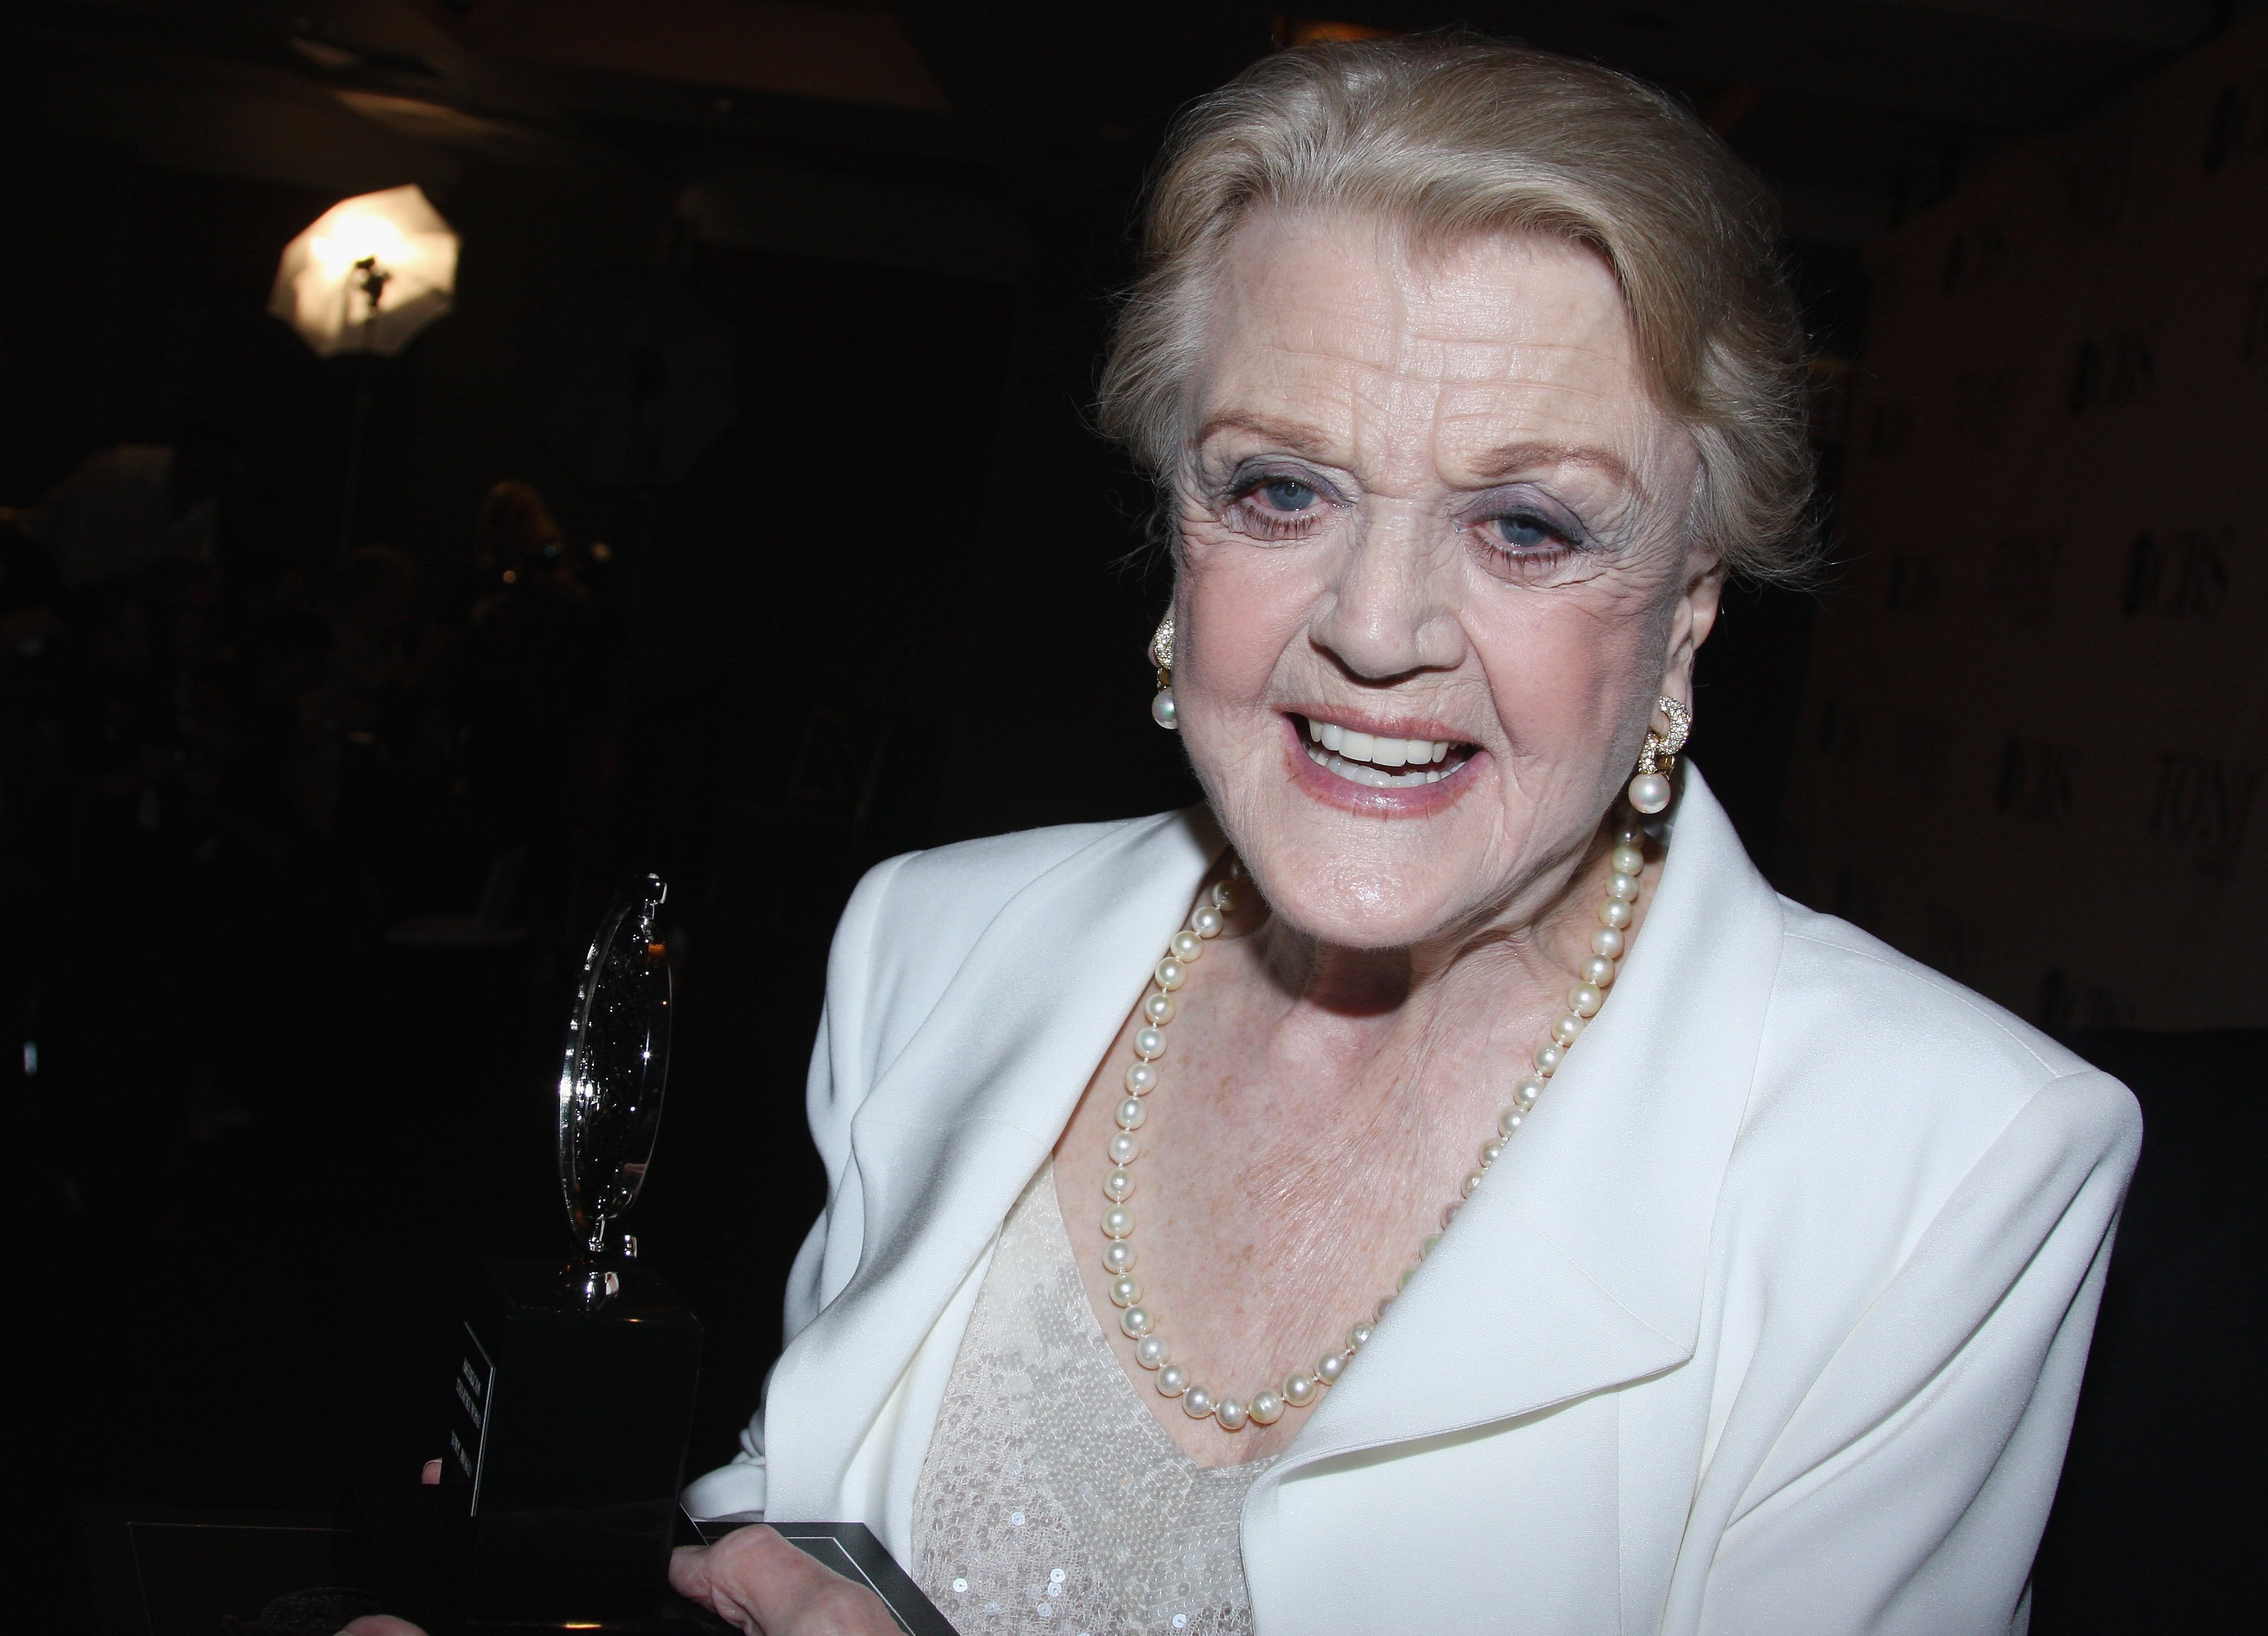 Angela Lansbury Said Her ‘Murder, She Wrote’ Character Was Closest to the Woman She Might Have Been If She Wasn’t an Actor